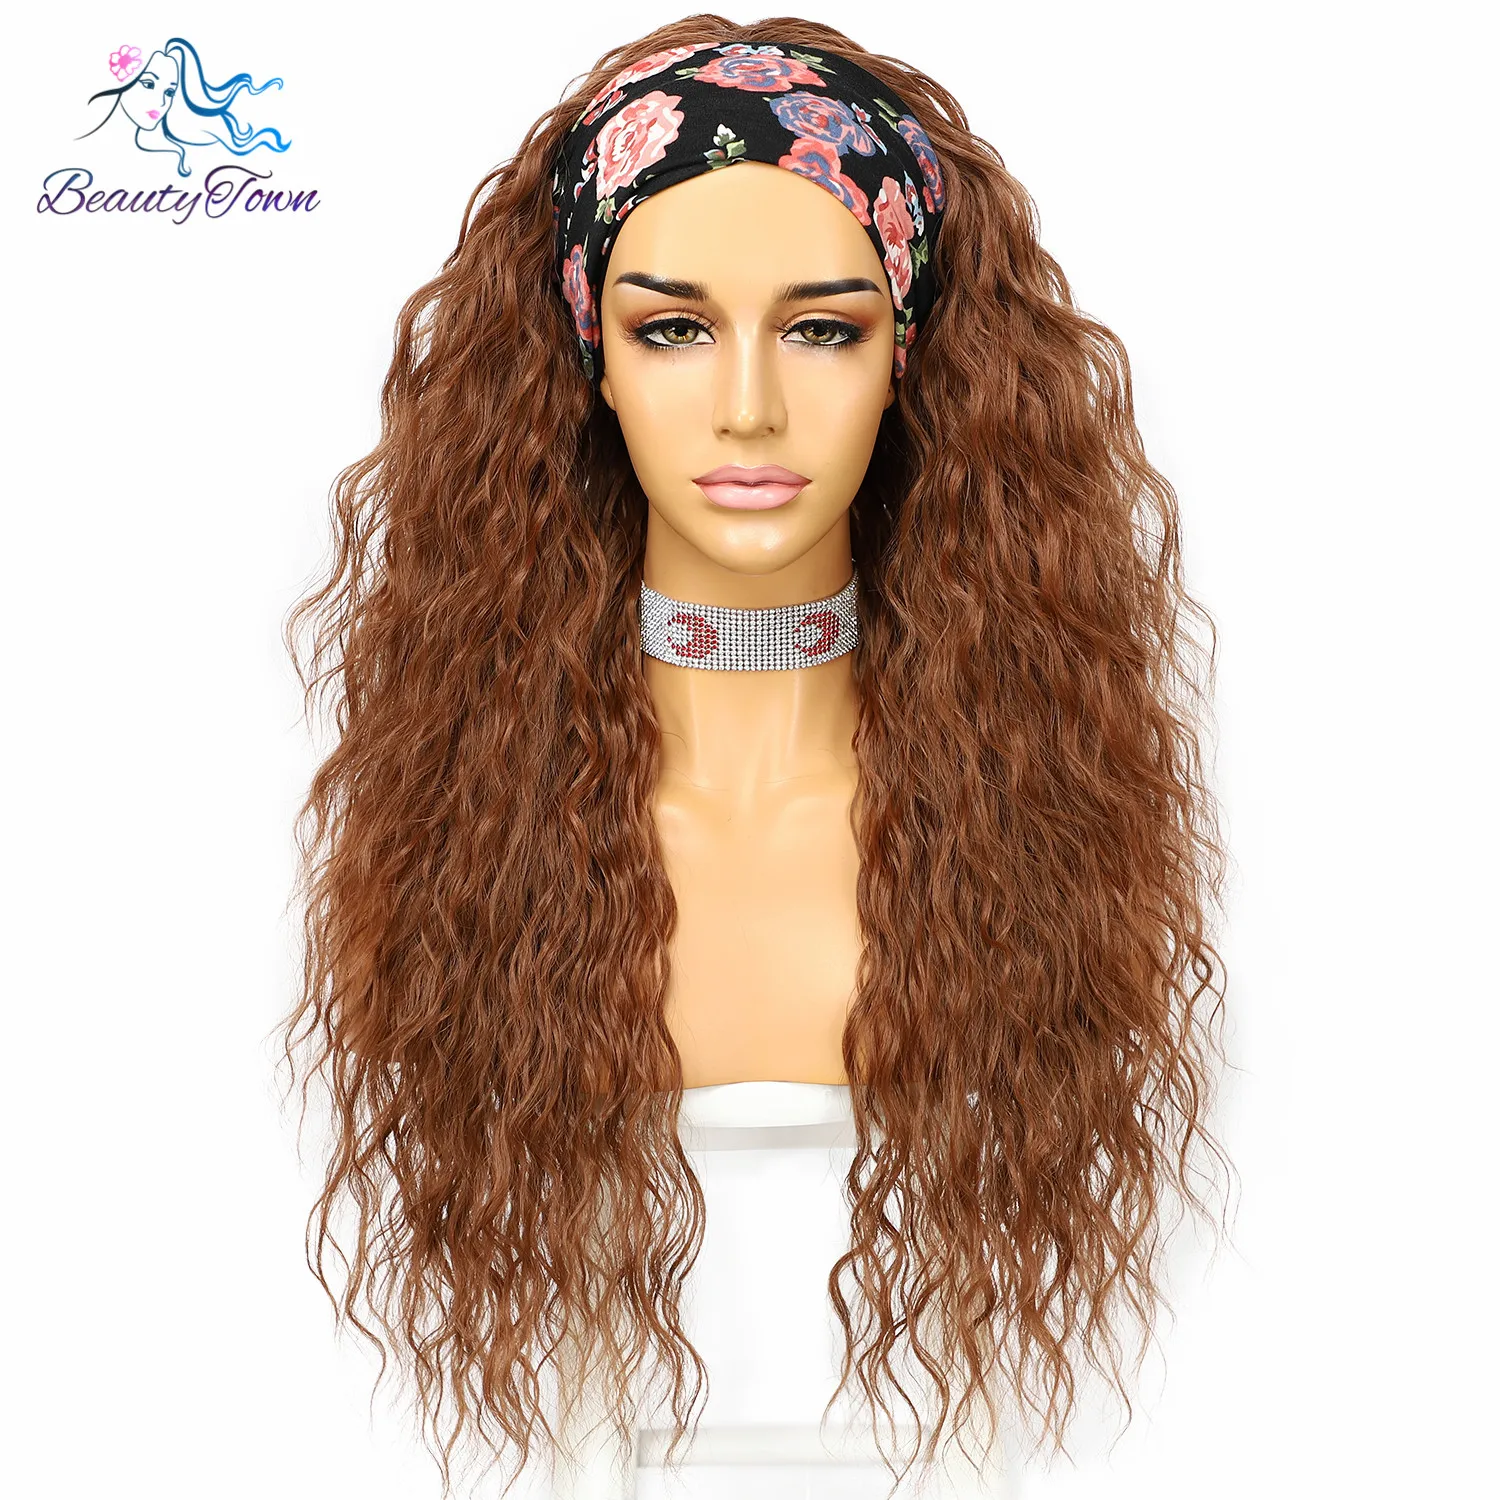 Headband Wig for Women Kinky Curly Wigs Long Brown #30 Color Daily Wedding Party Travel Holiday Glueless Hair 2 Free Bands